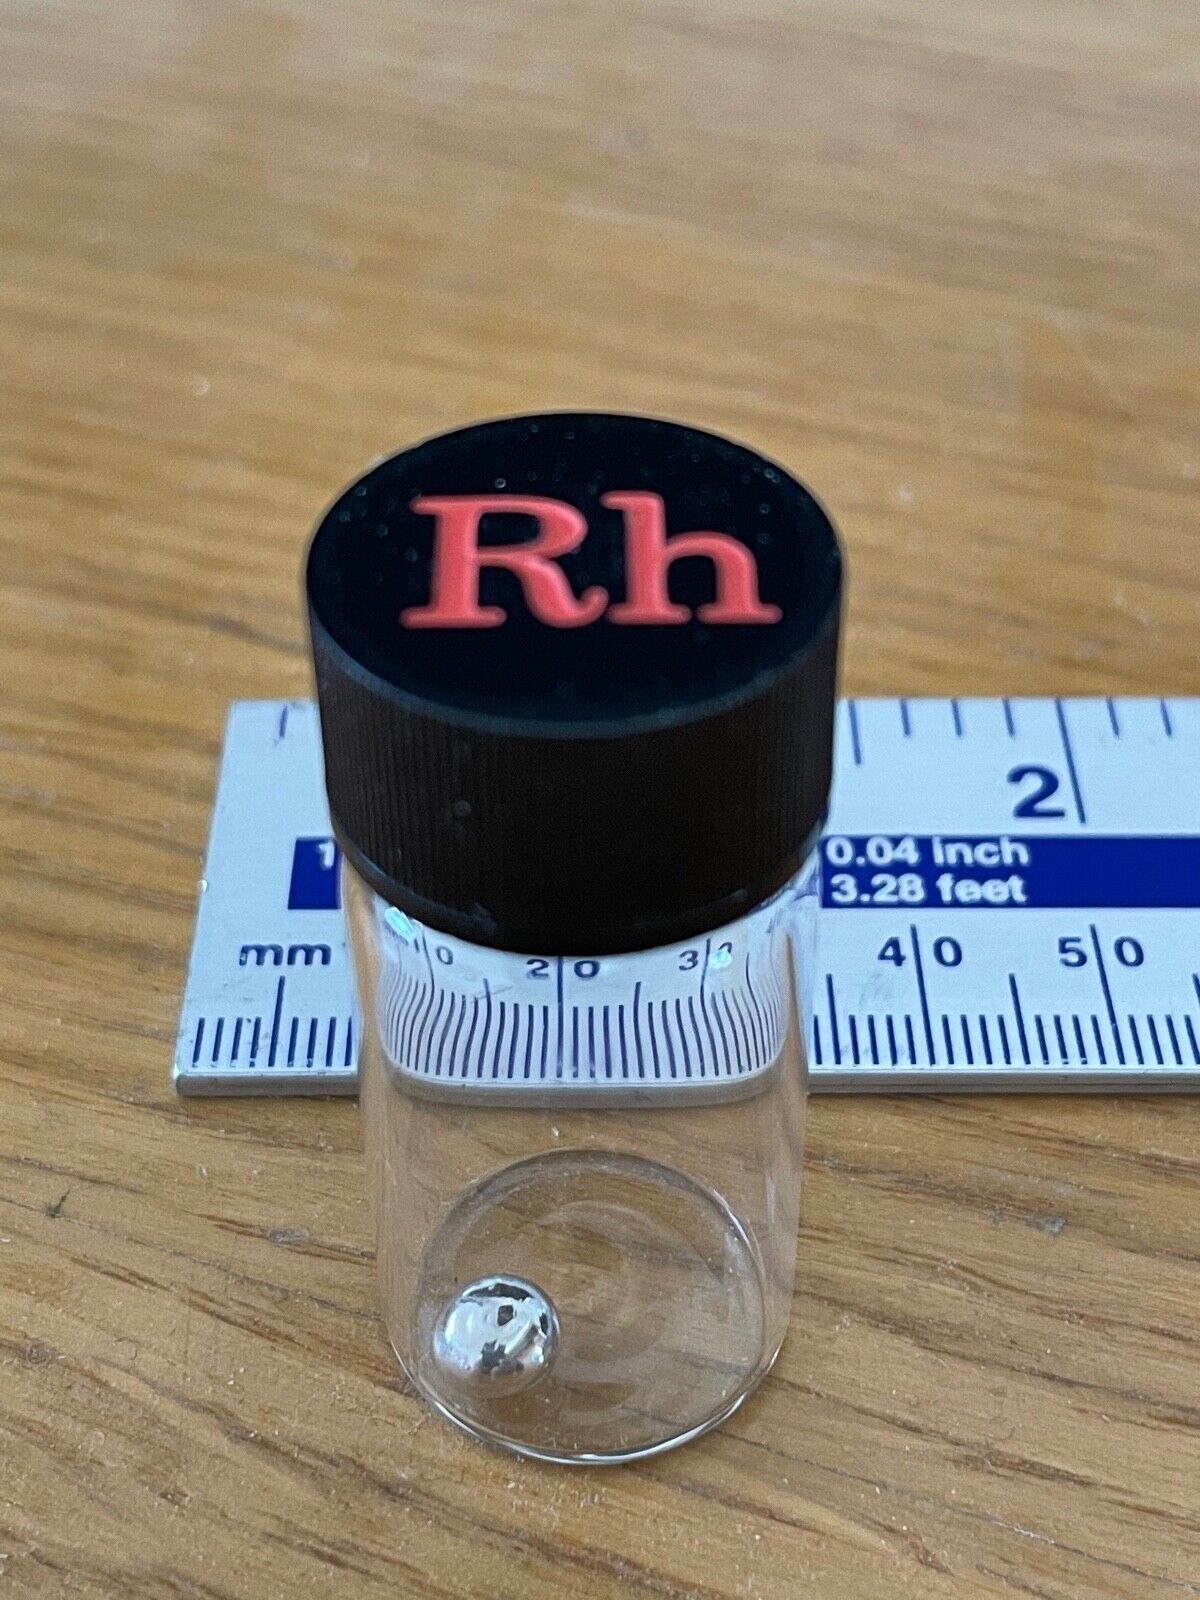 Rhodium Element Solid Metal Sample 99.99% in 7ml Glass Vial with Engraved Lid